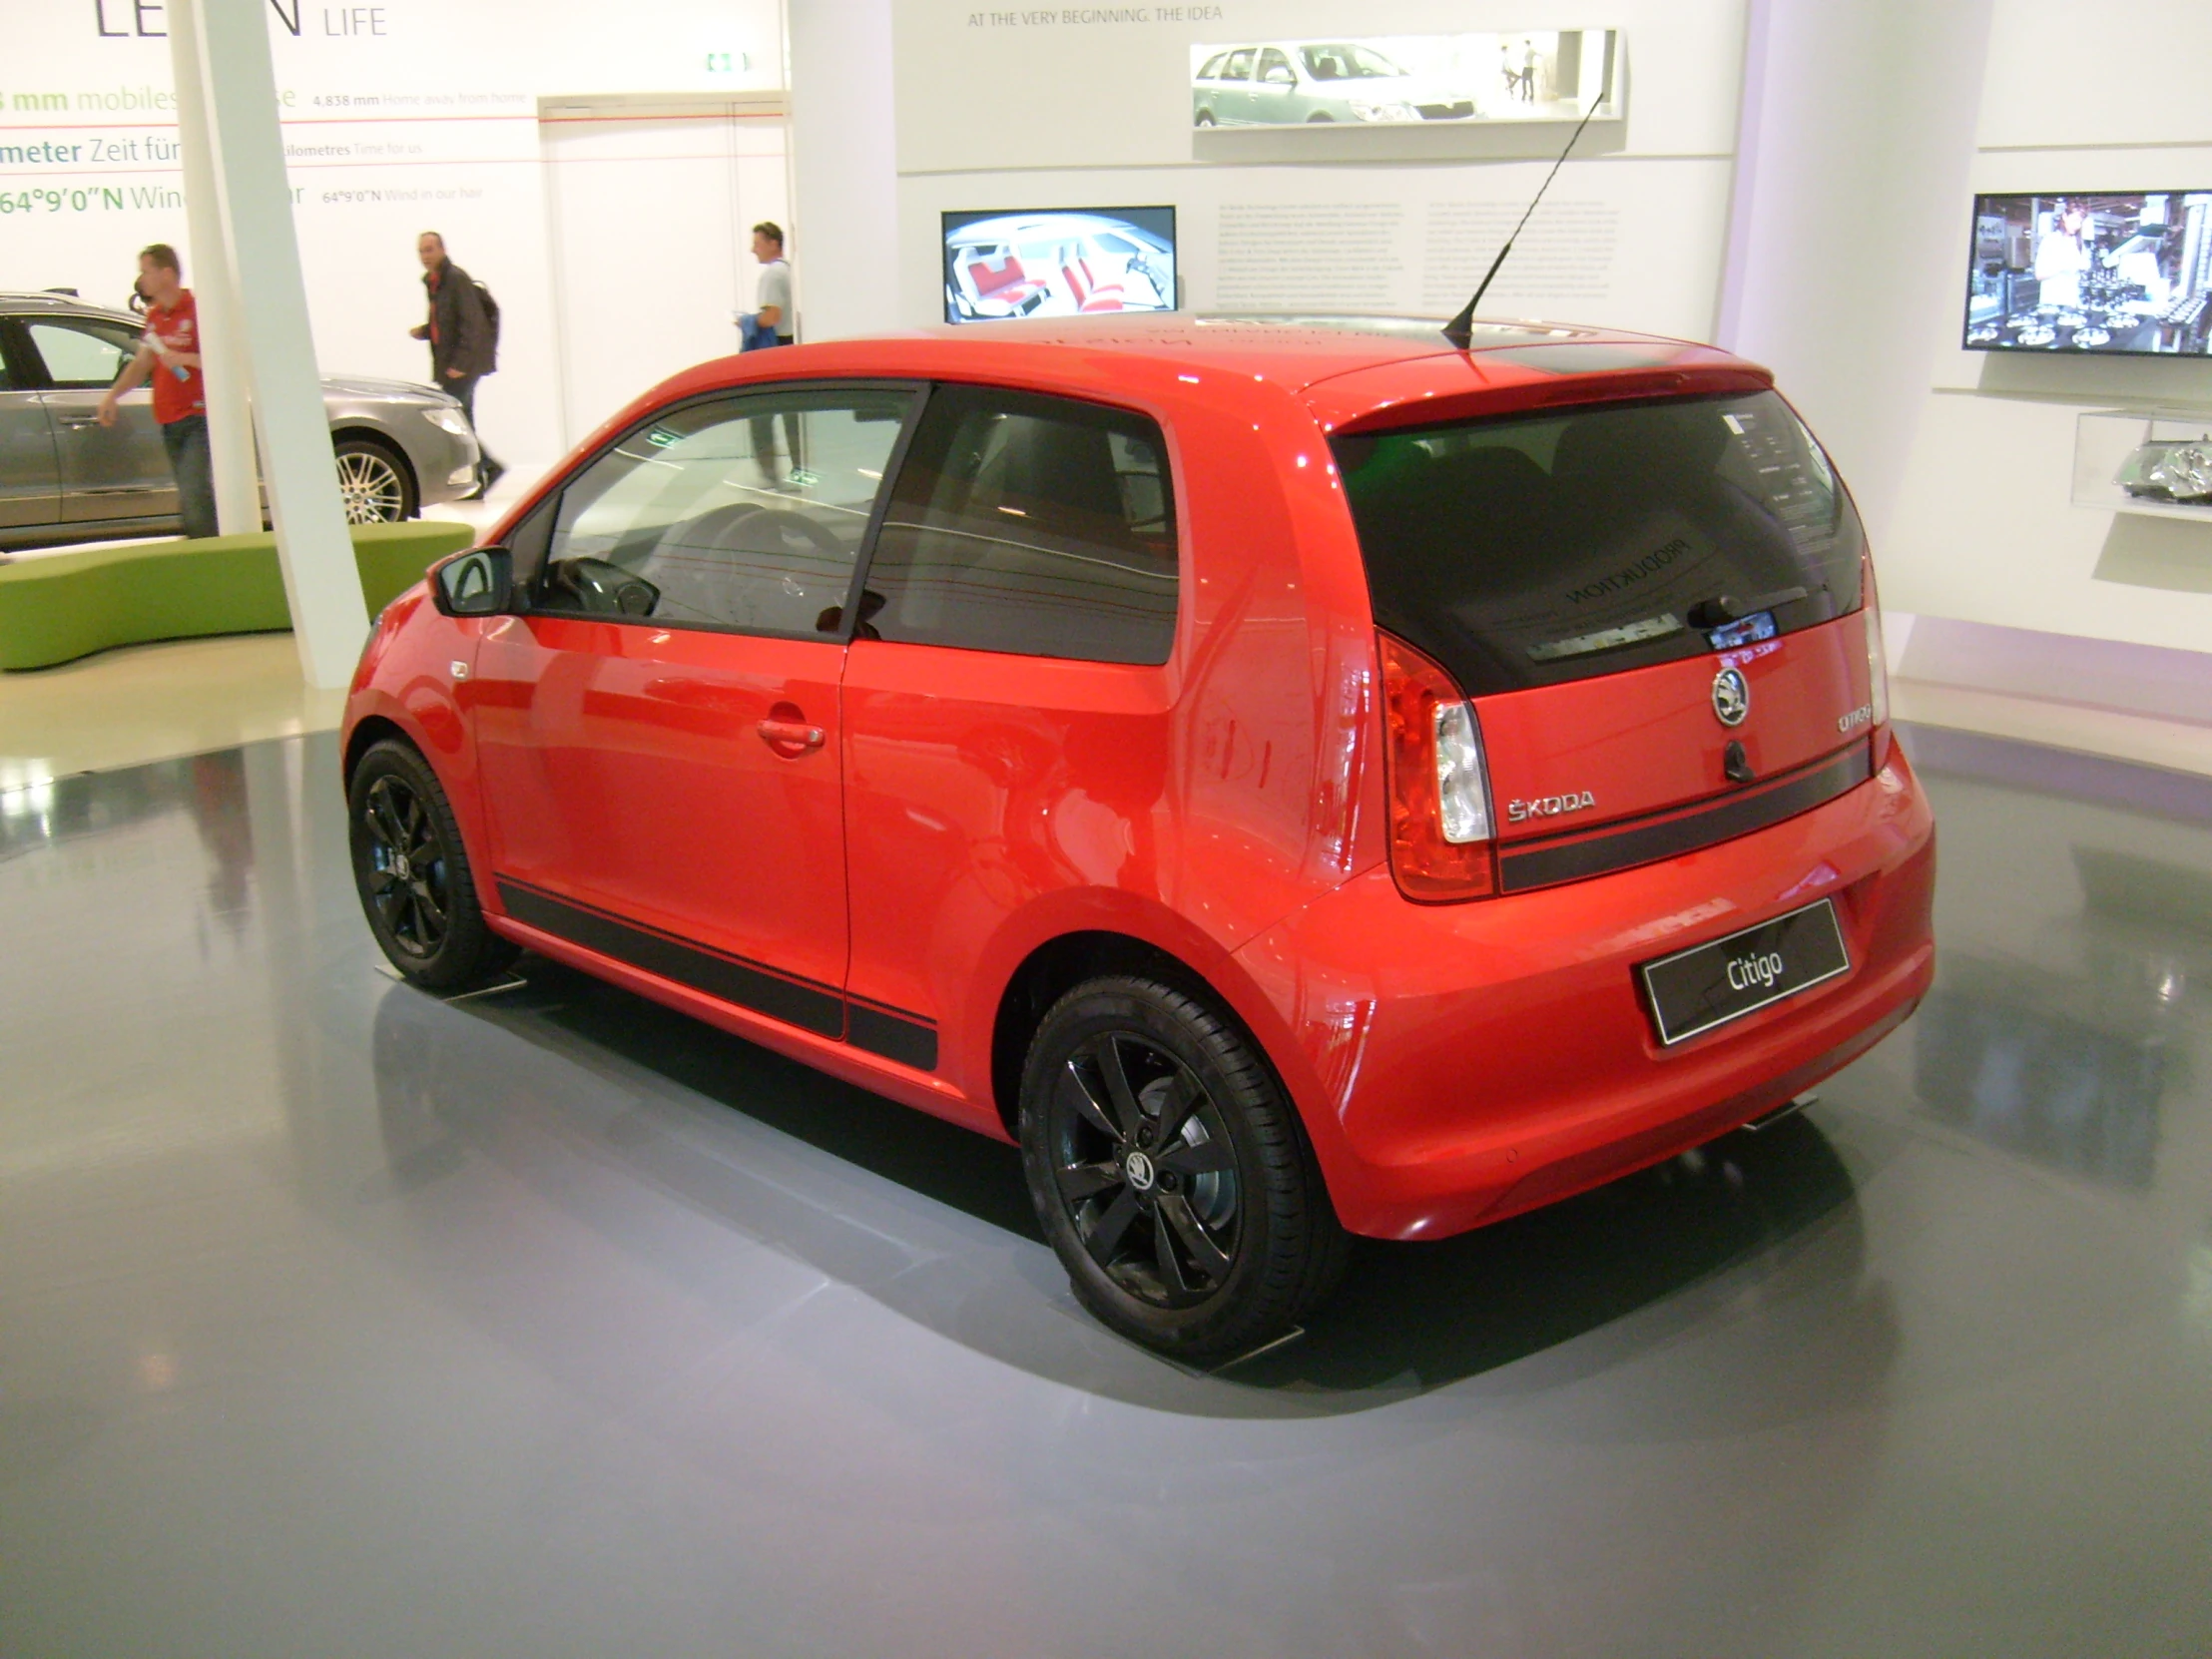 a small car is on display at an exhibition